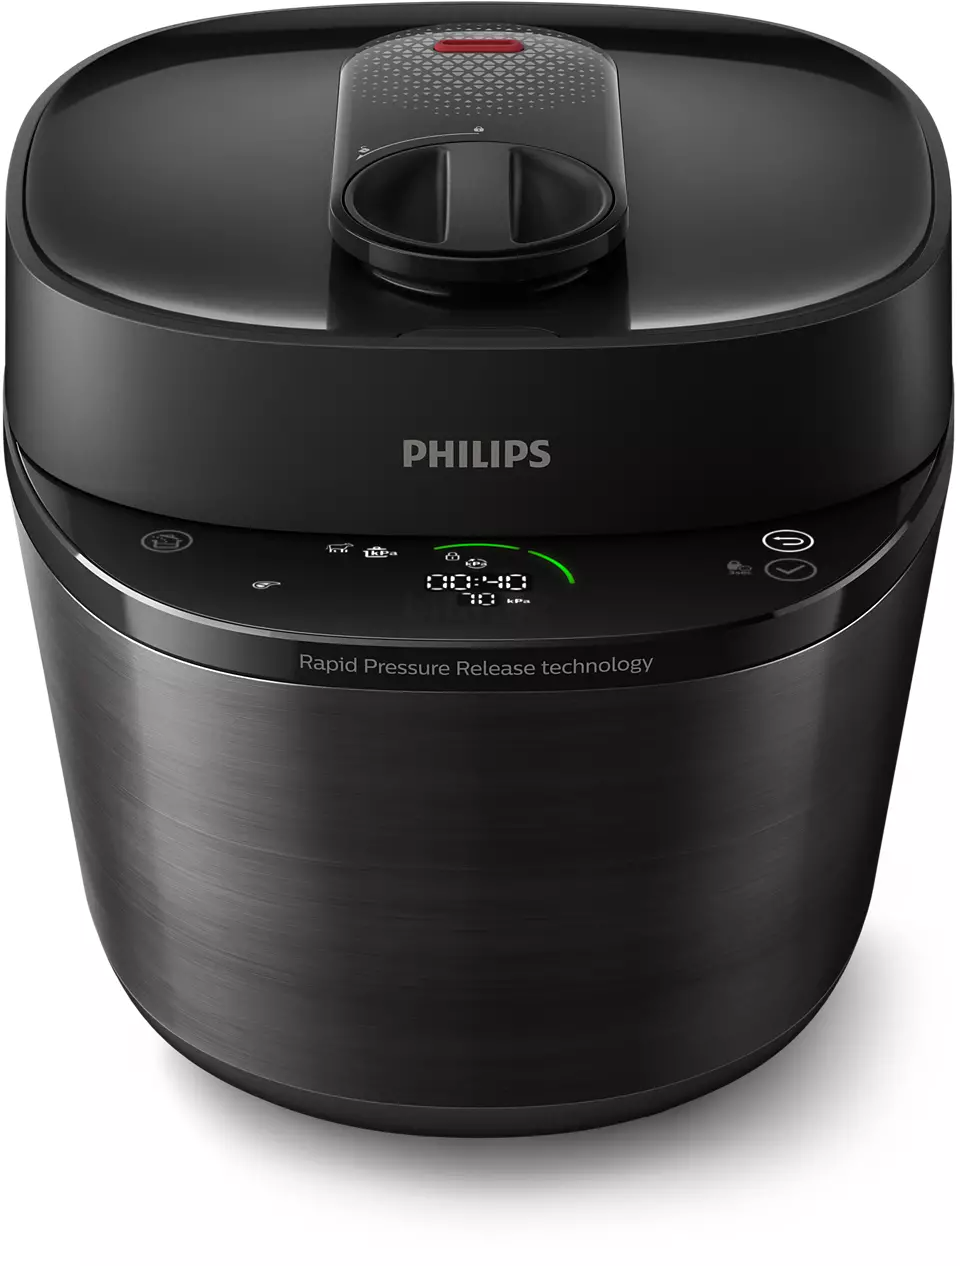 PHILIPS ALL IN ONE PRESSURE COOKER 5L 3000 SERIES